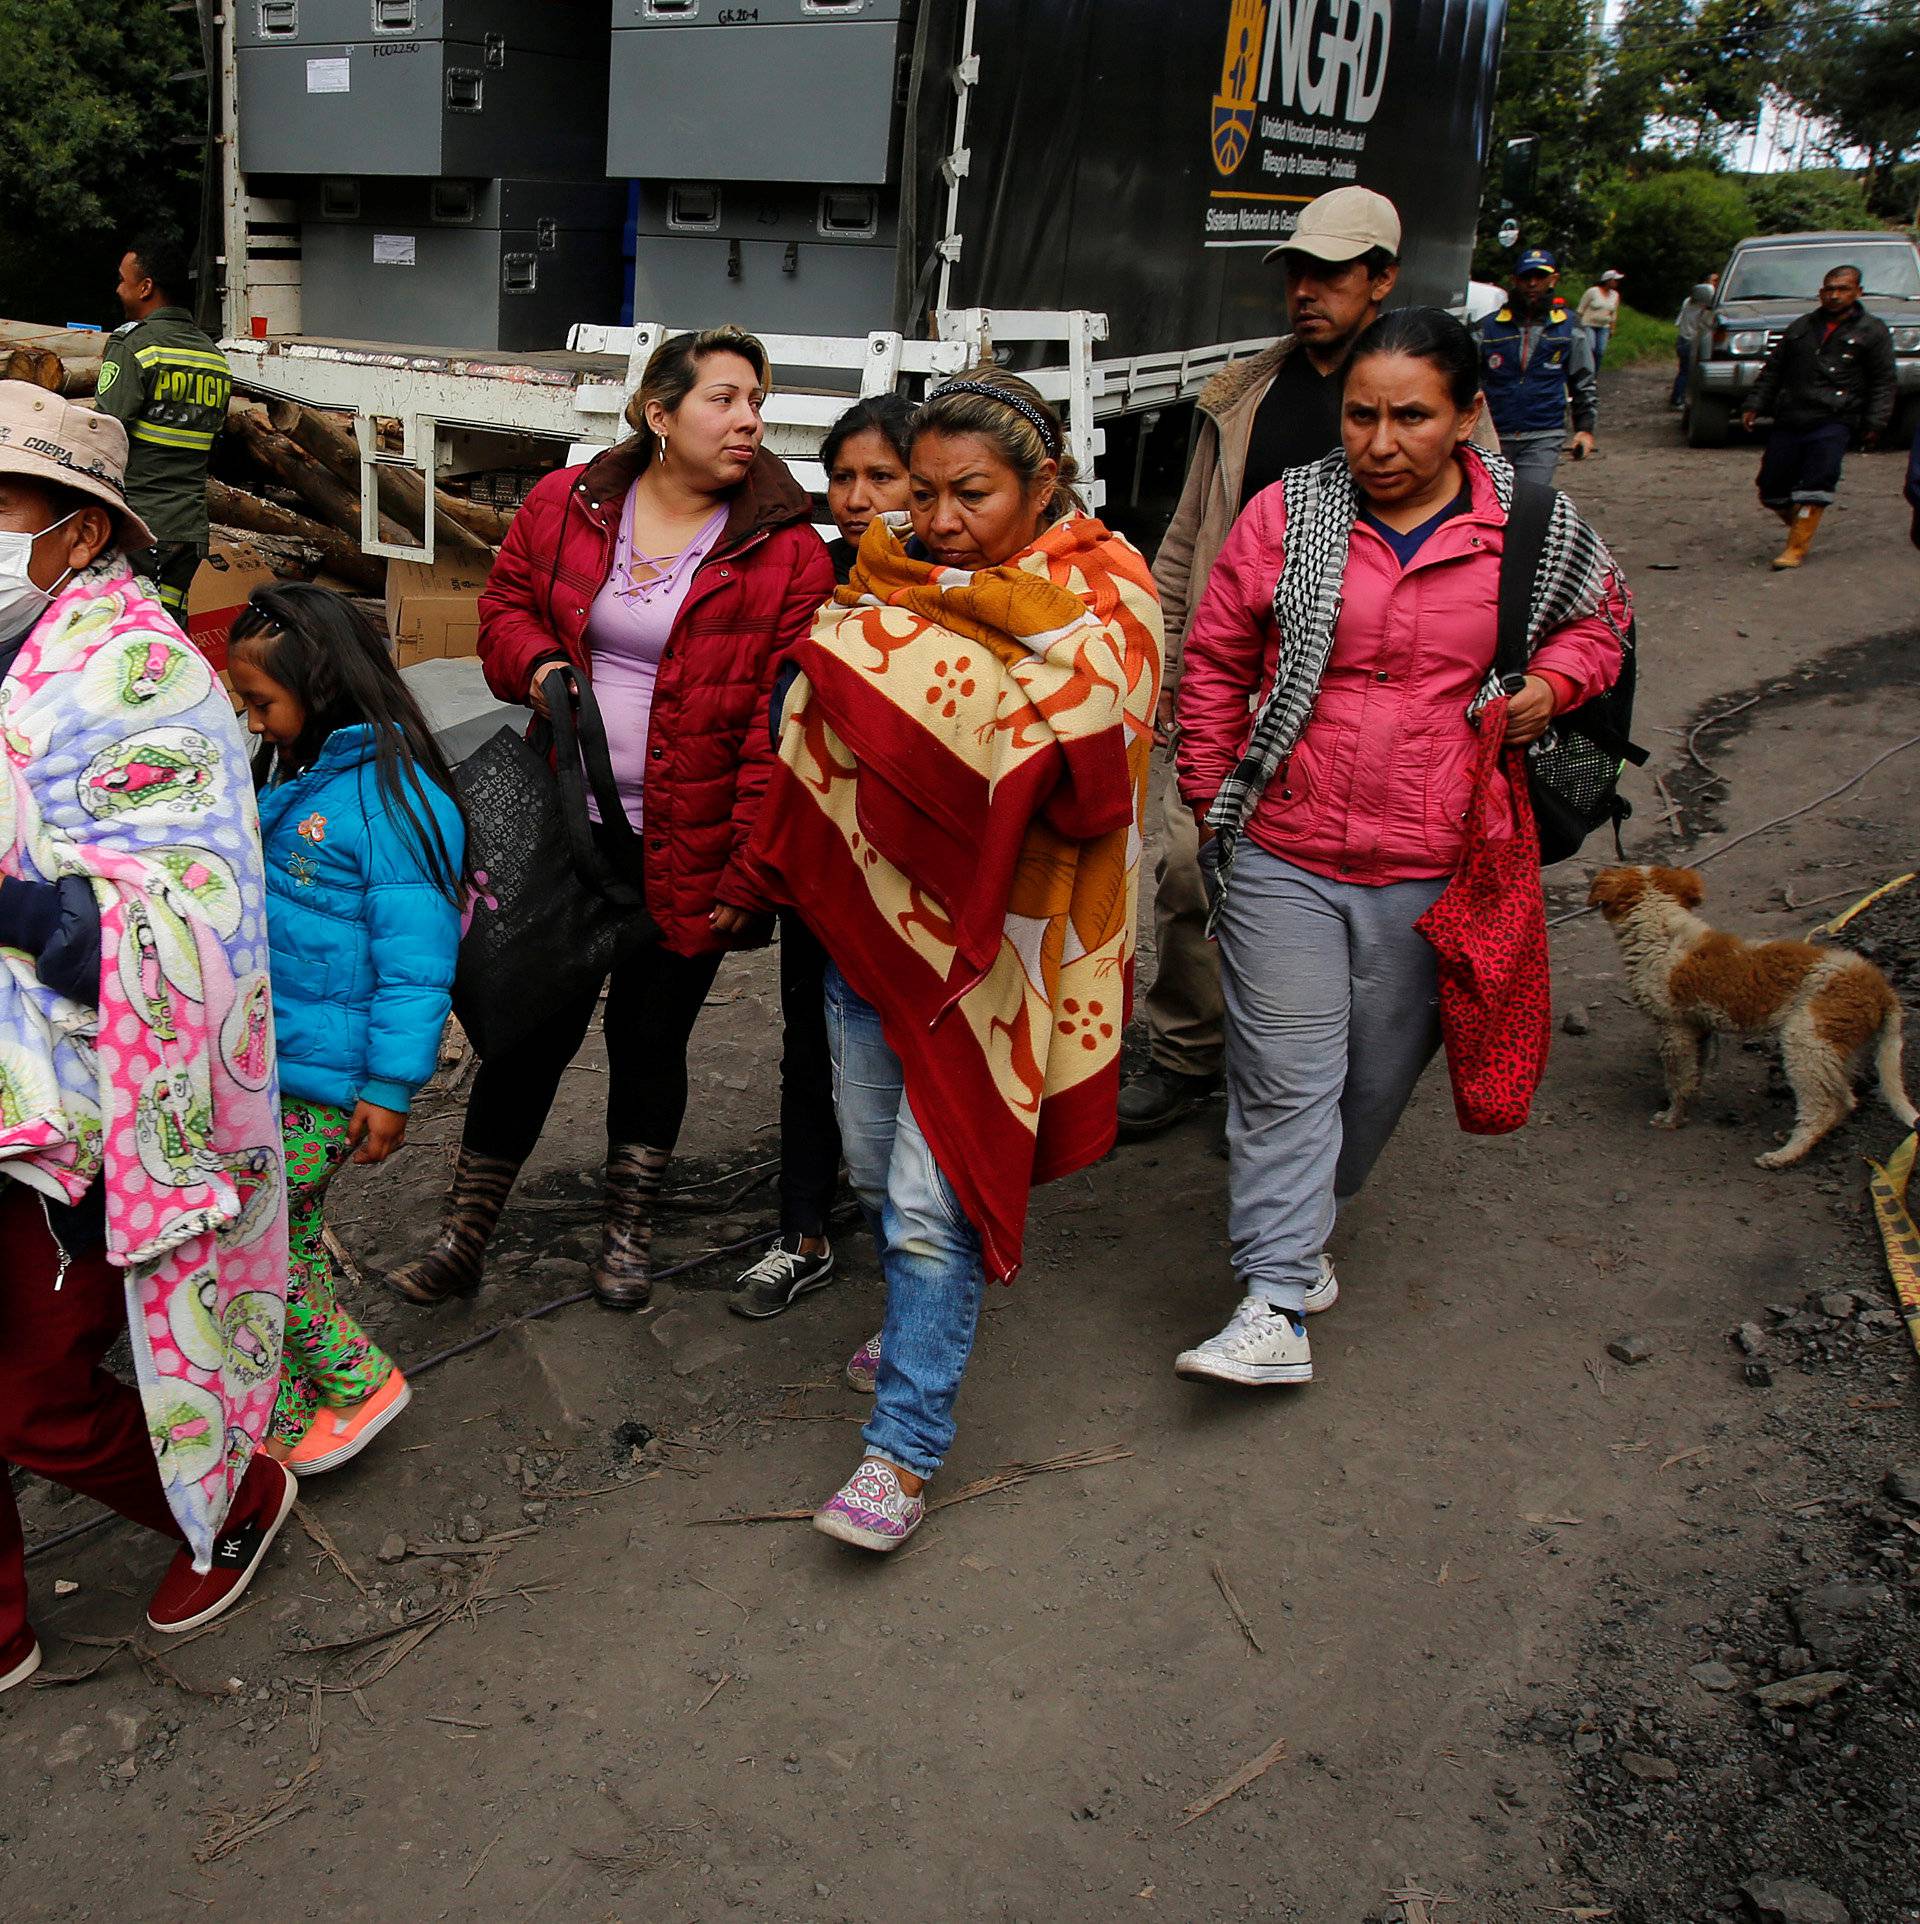 People wait for news of their missing relatives after an explosion at an underground coal mine  on Friday, in Cucunuba